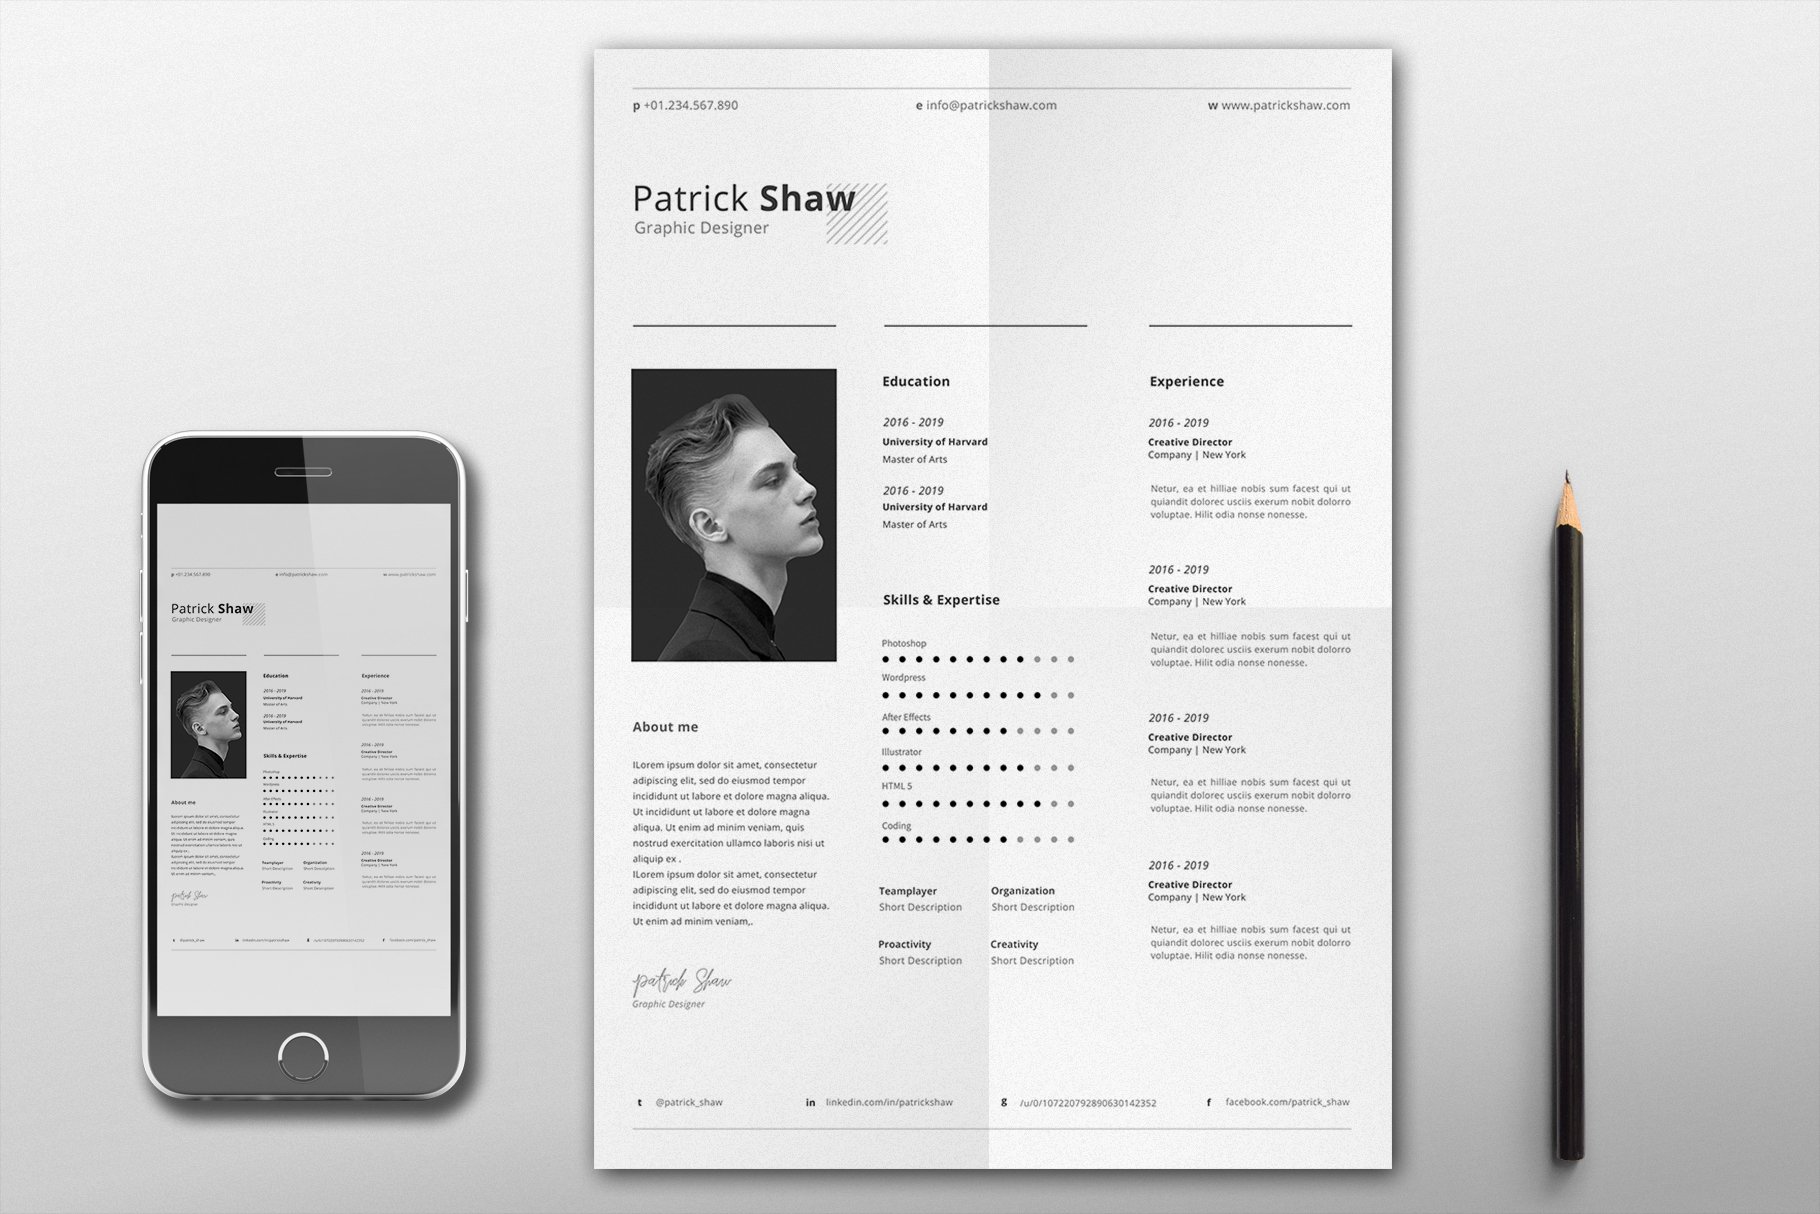 Patrick Resume Template preview image.